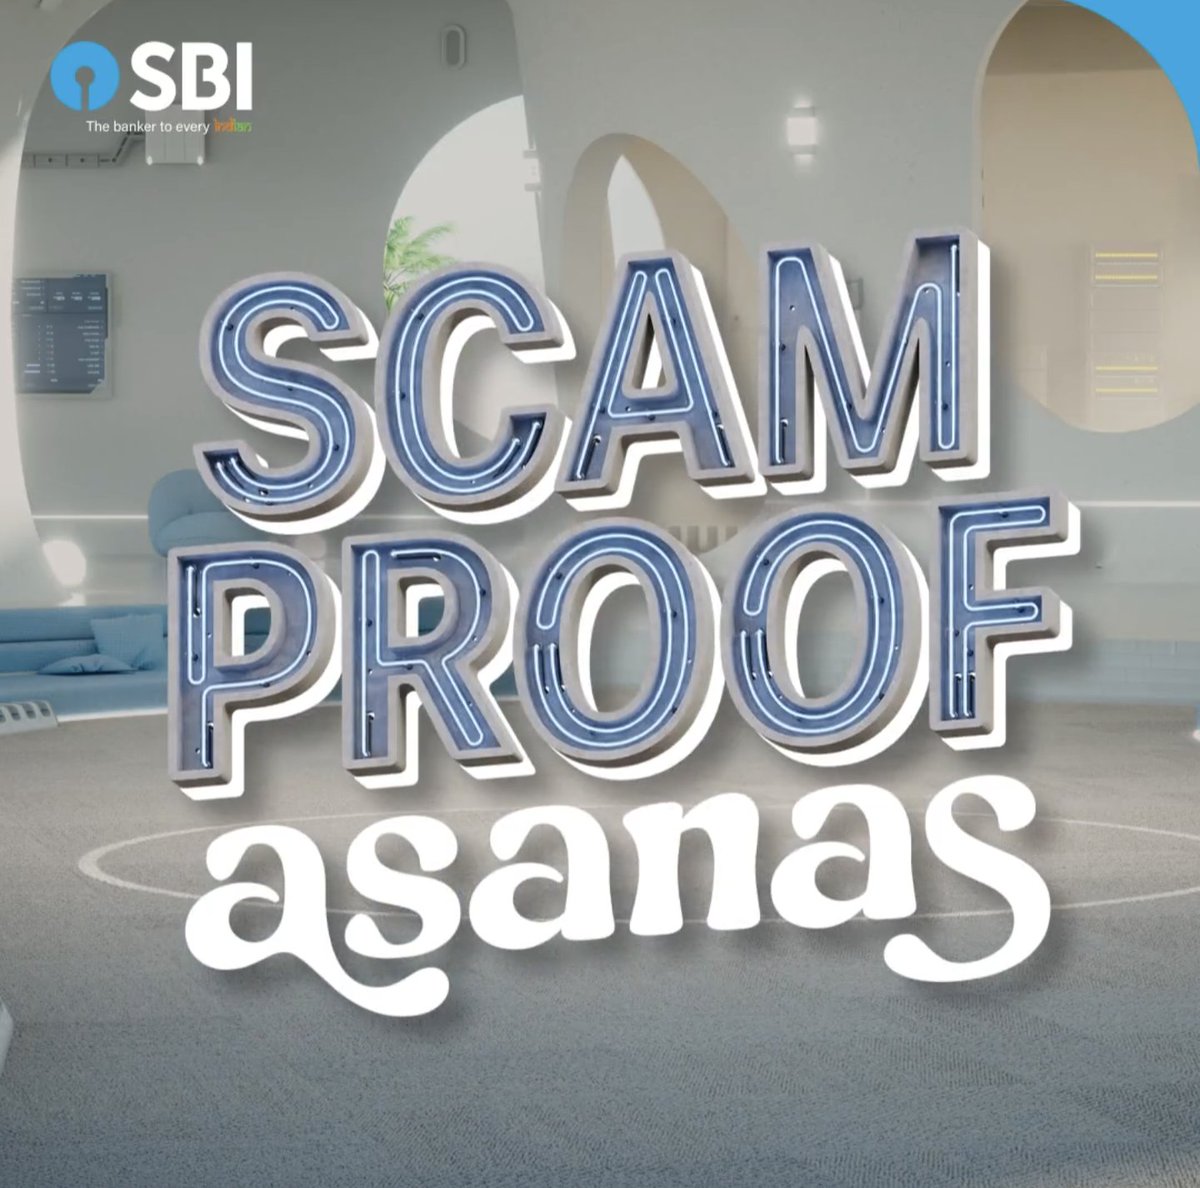 Watch out for @TheOfficialSBI 's #ScamProofAsanas to know more . . .
#WorldYogaDay23 #cybersecurity